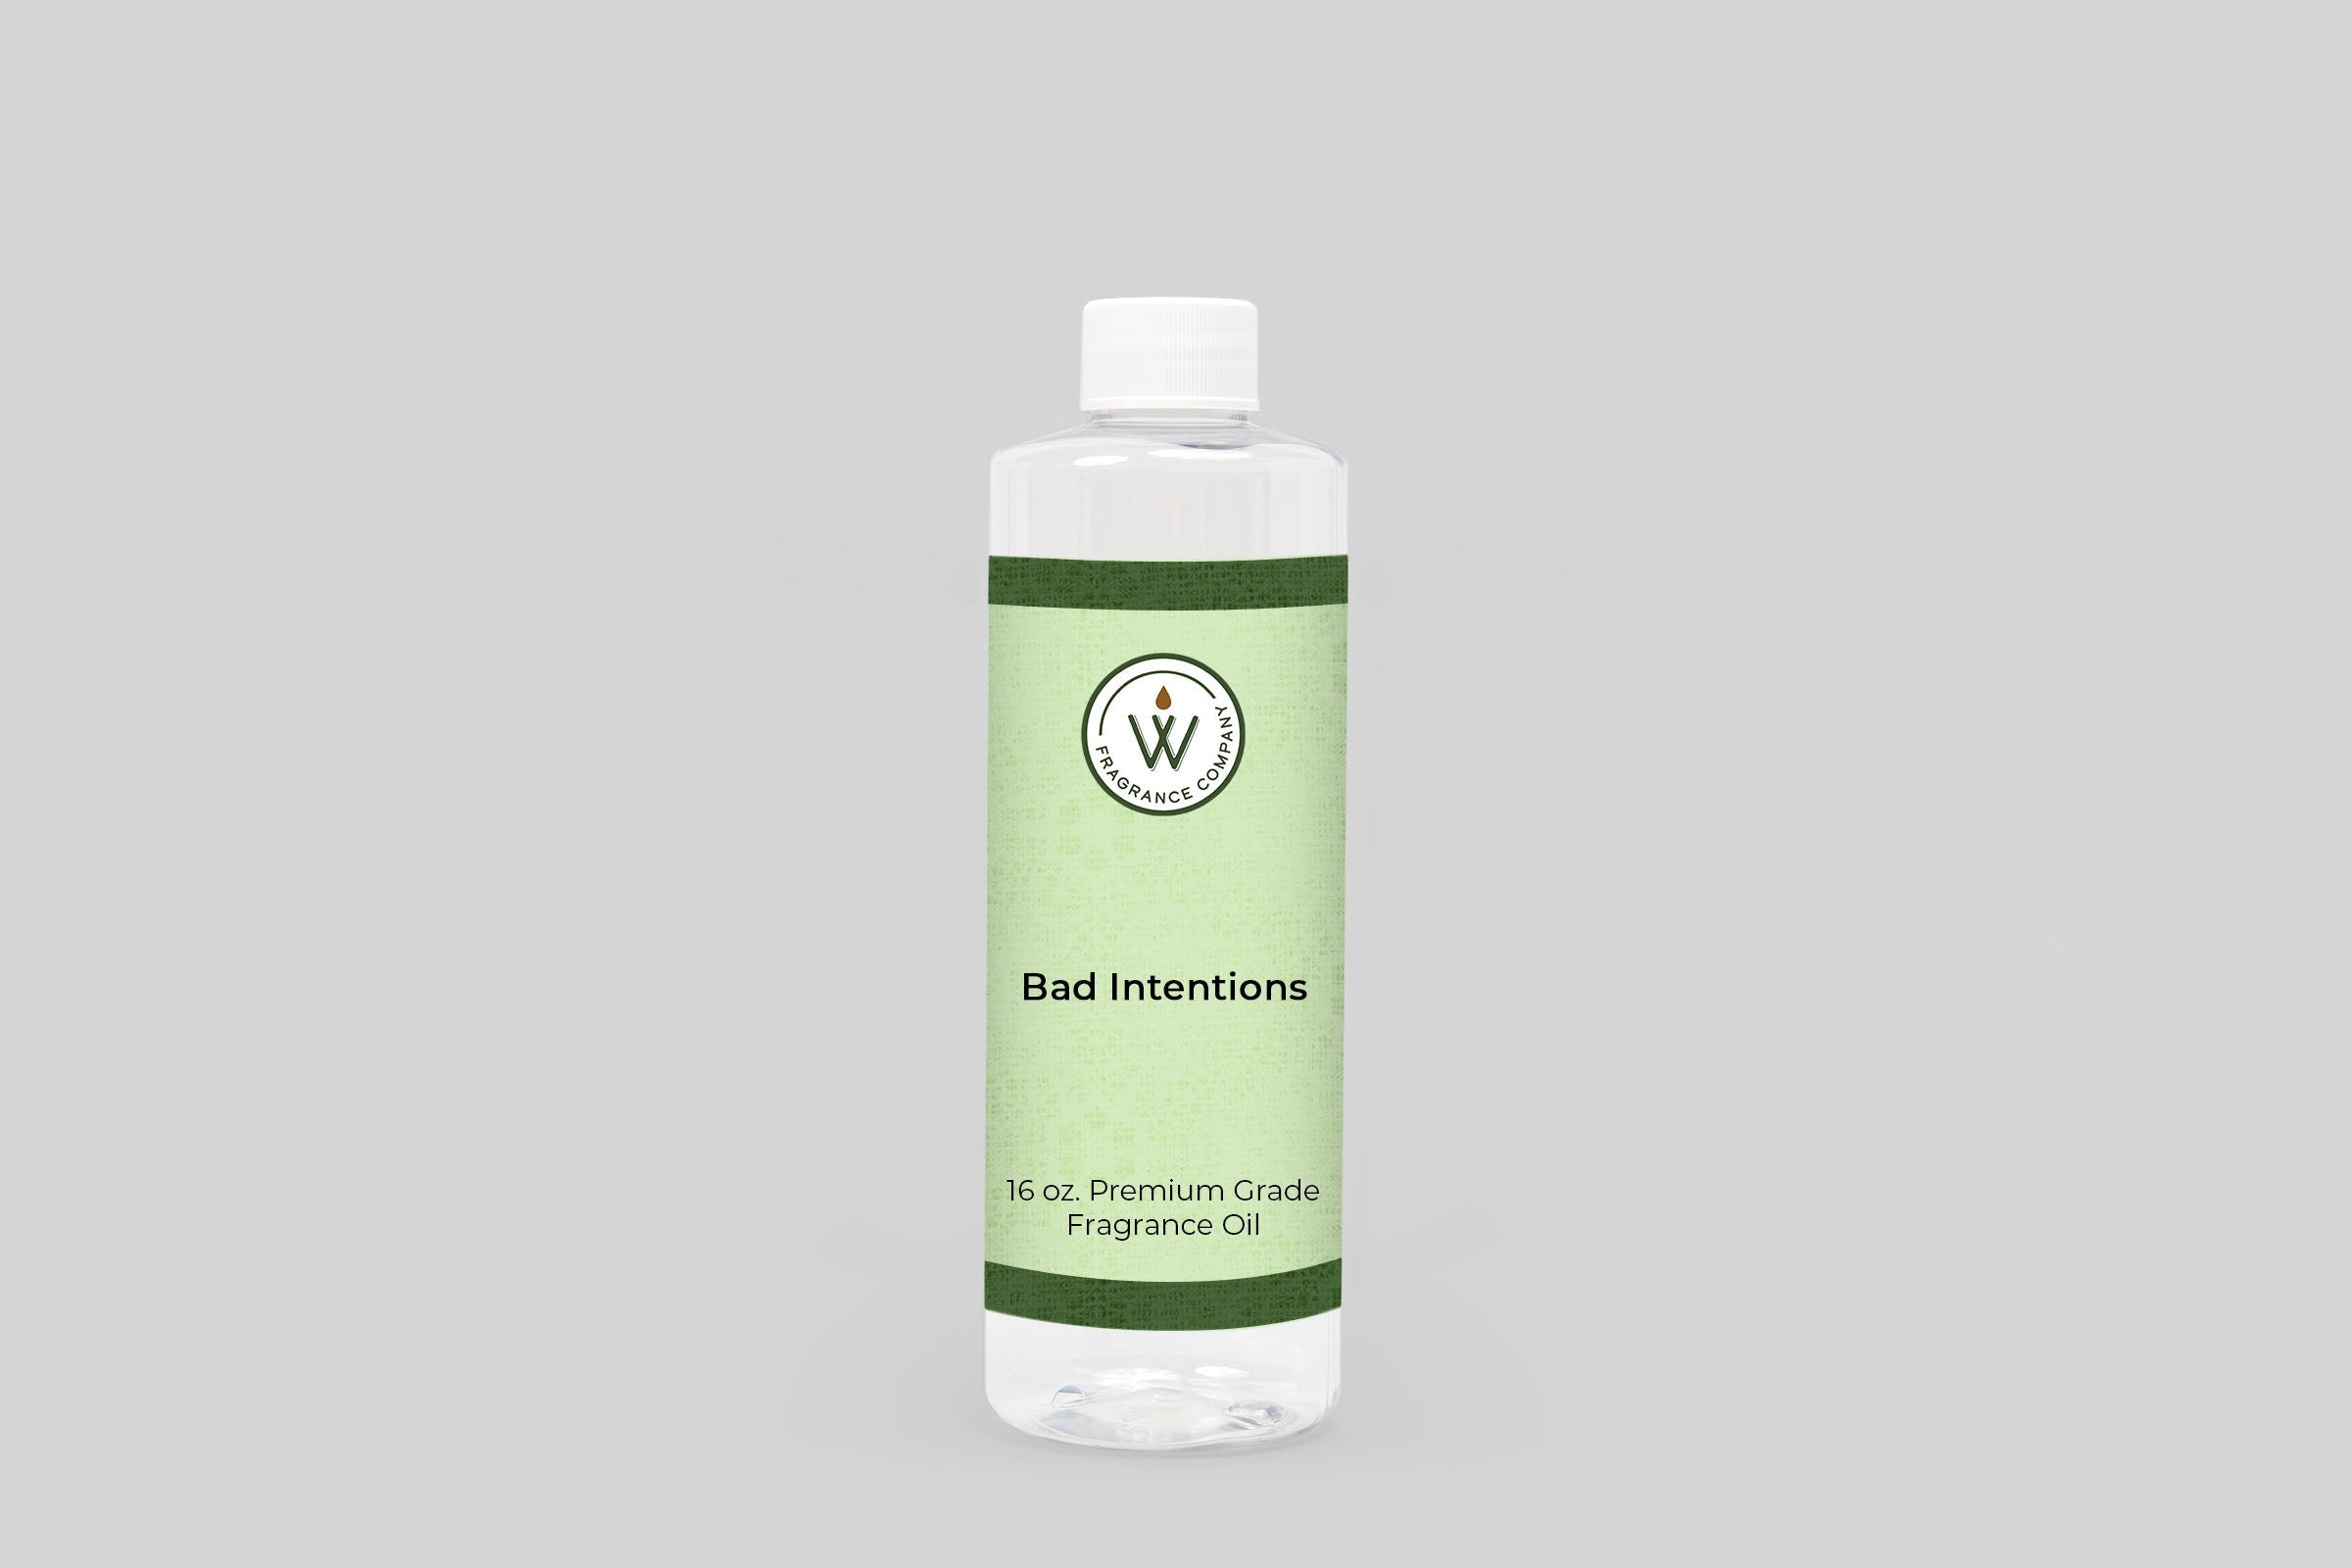 Bad Intentions Fragrance Oil